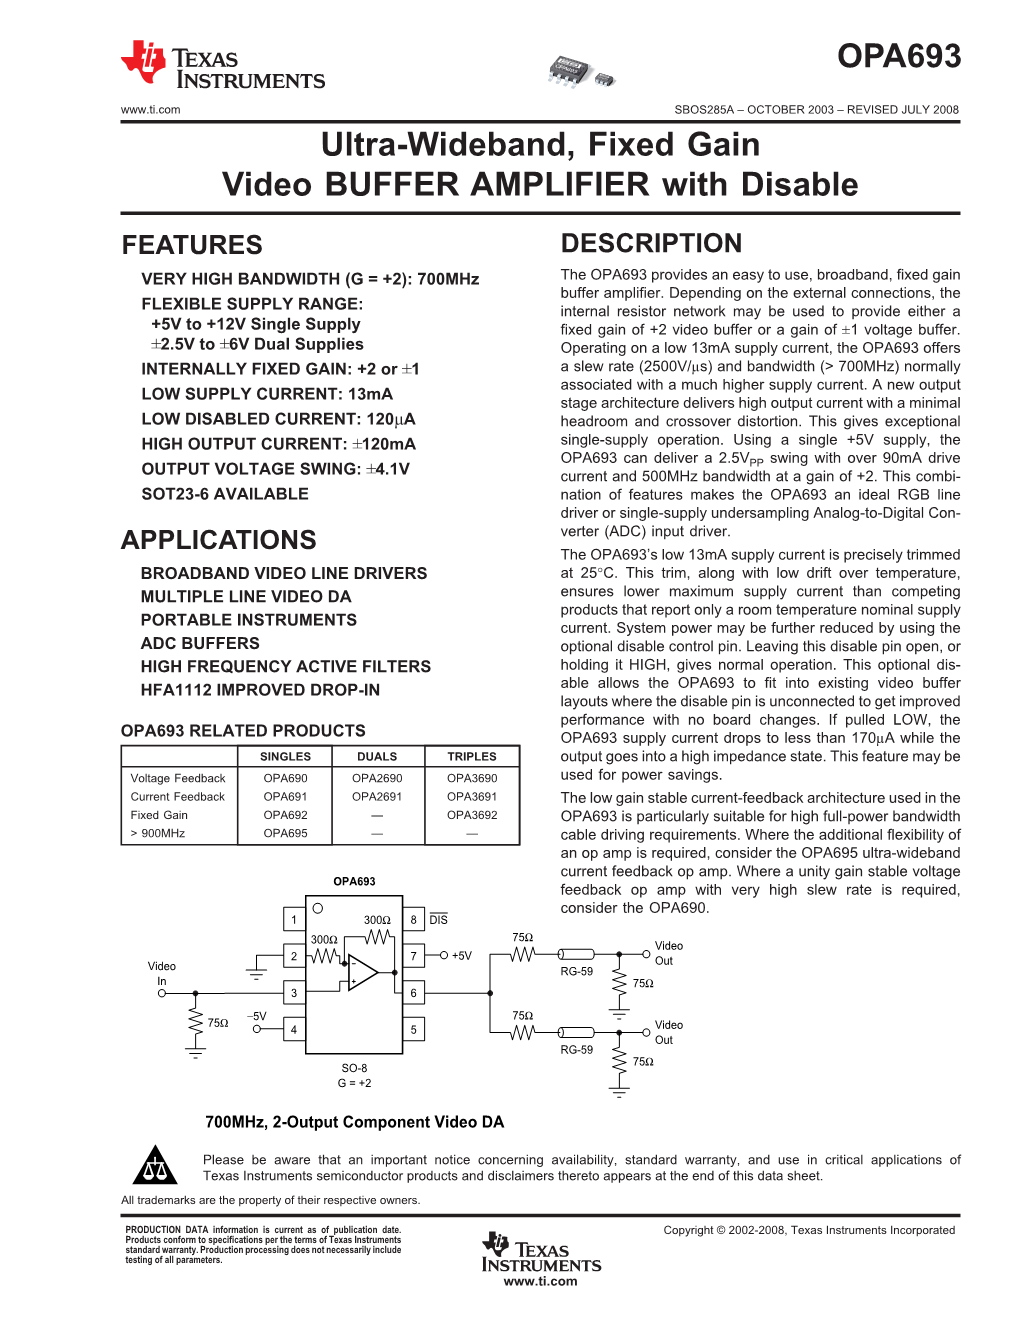 Ultra-Wideband, Fixed Gain Video BUFFER AMPLIFIER with Disable